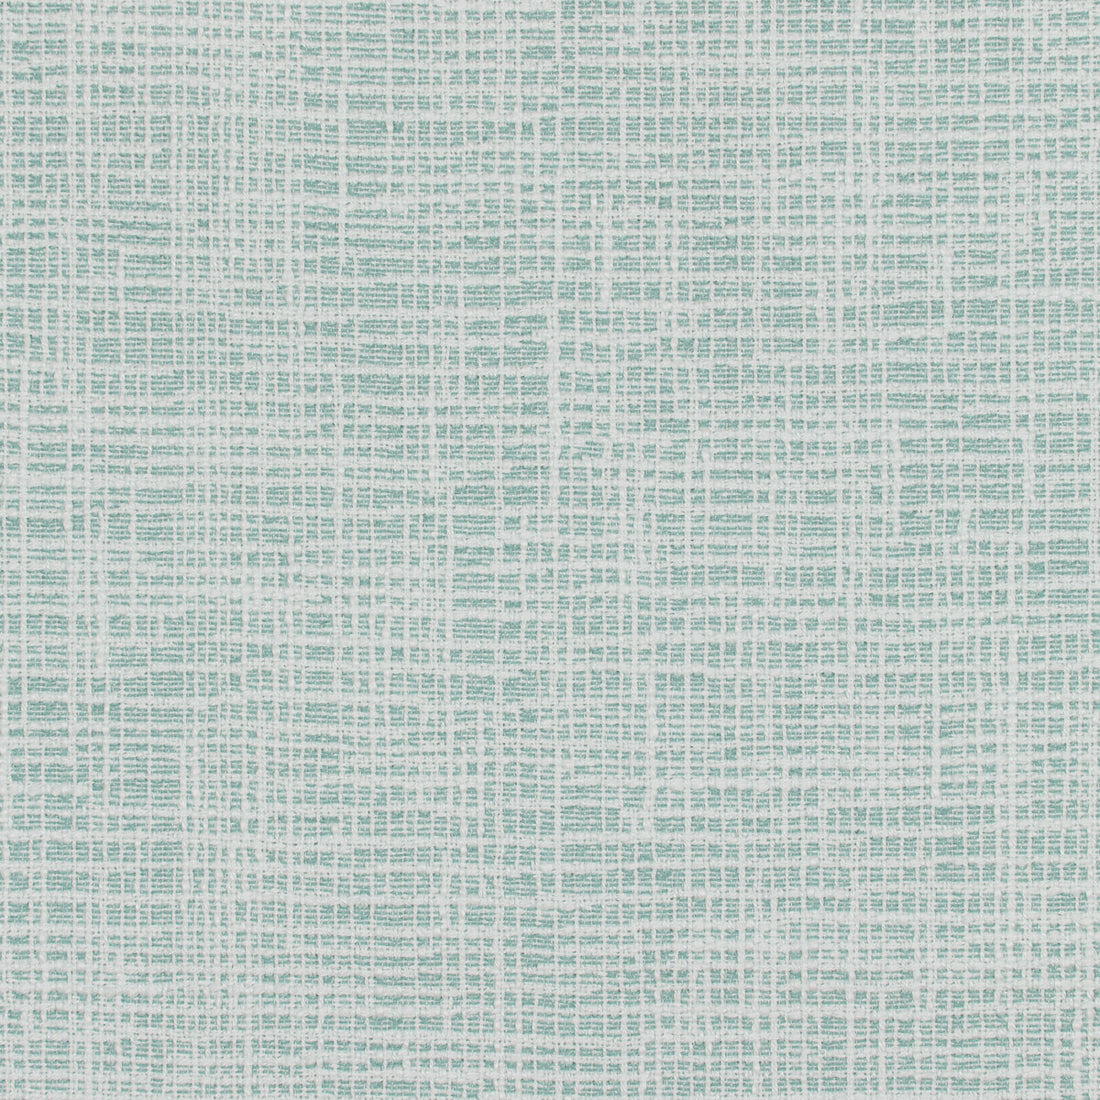 Kravet Design fabric in 36083-13 color - pattern 36083.13.0 - by Kravet Design in the Inside Out Performance Fabrics collection